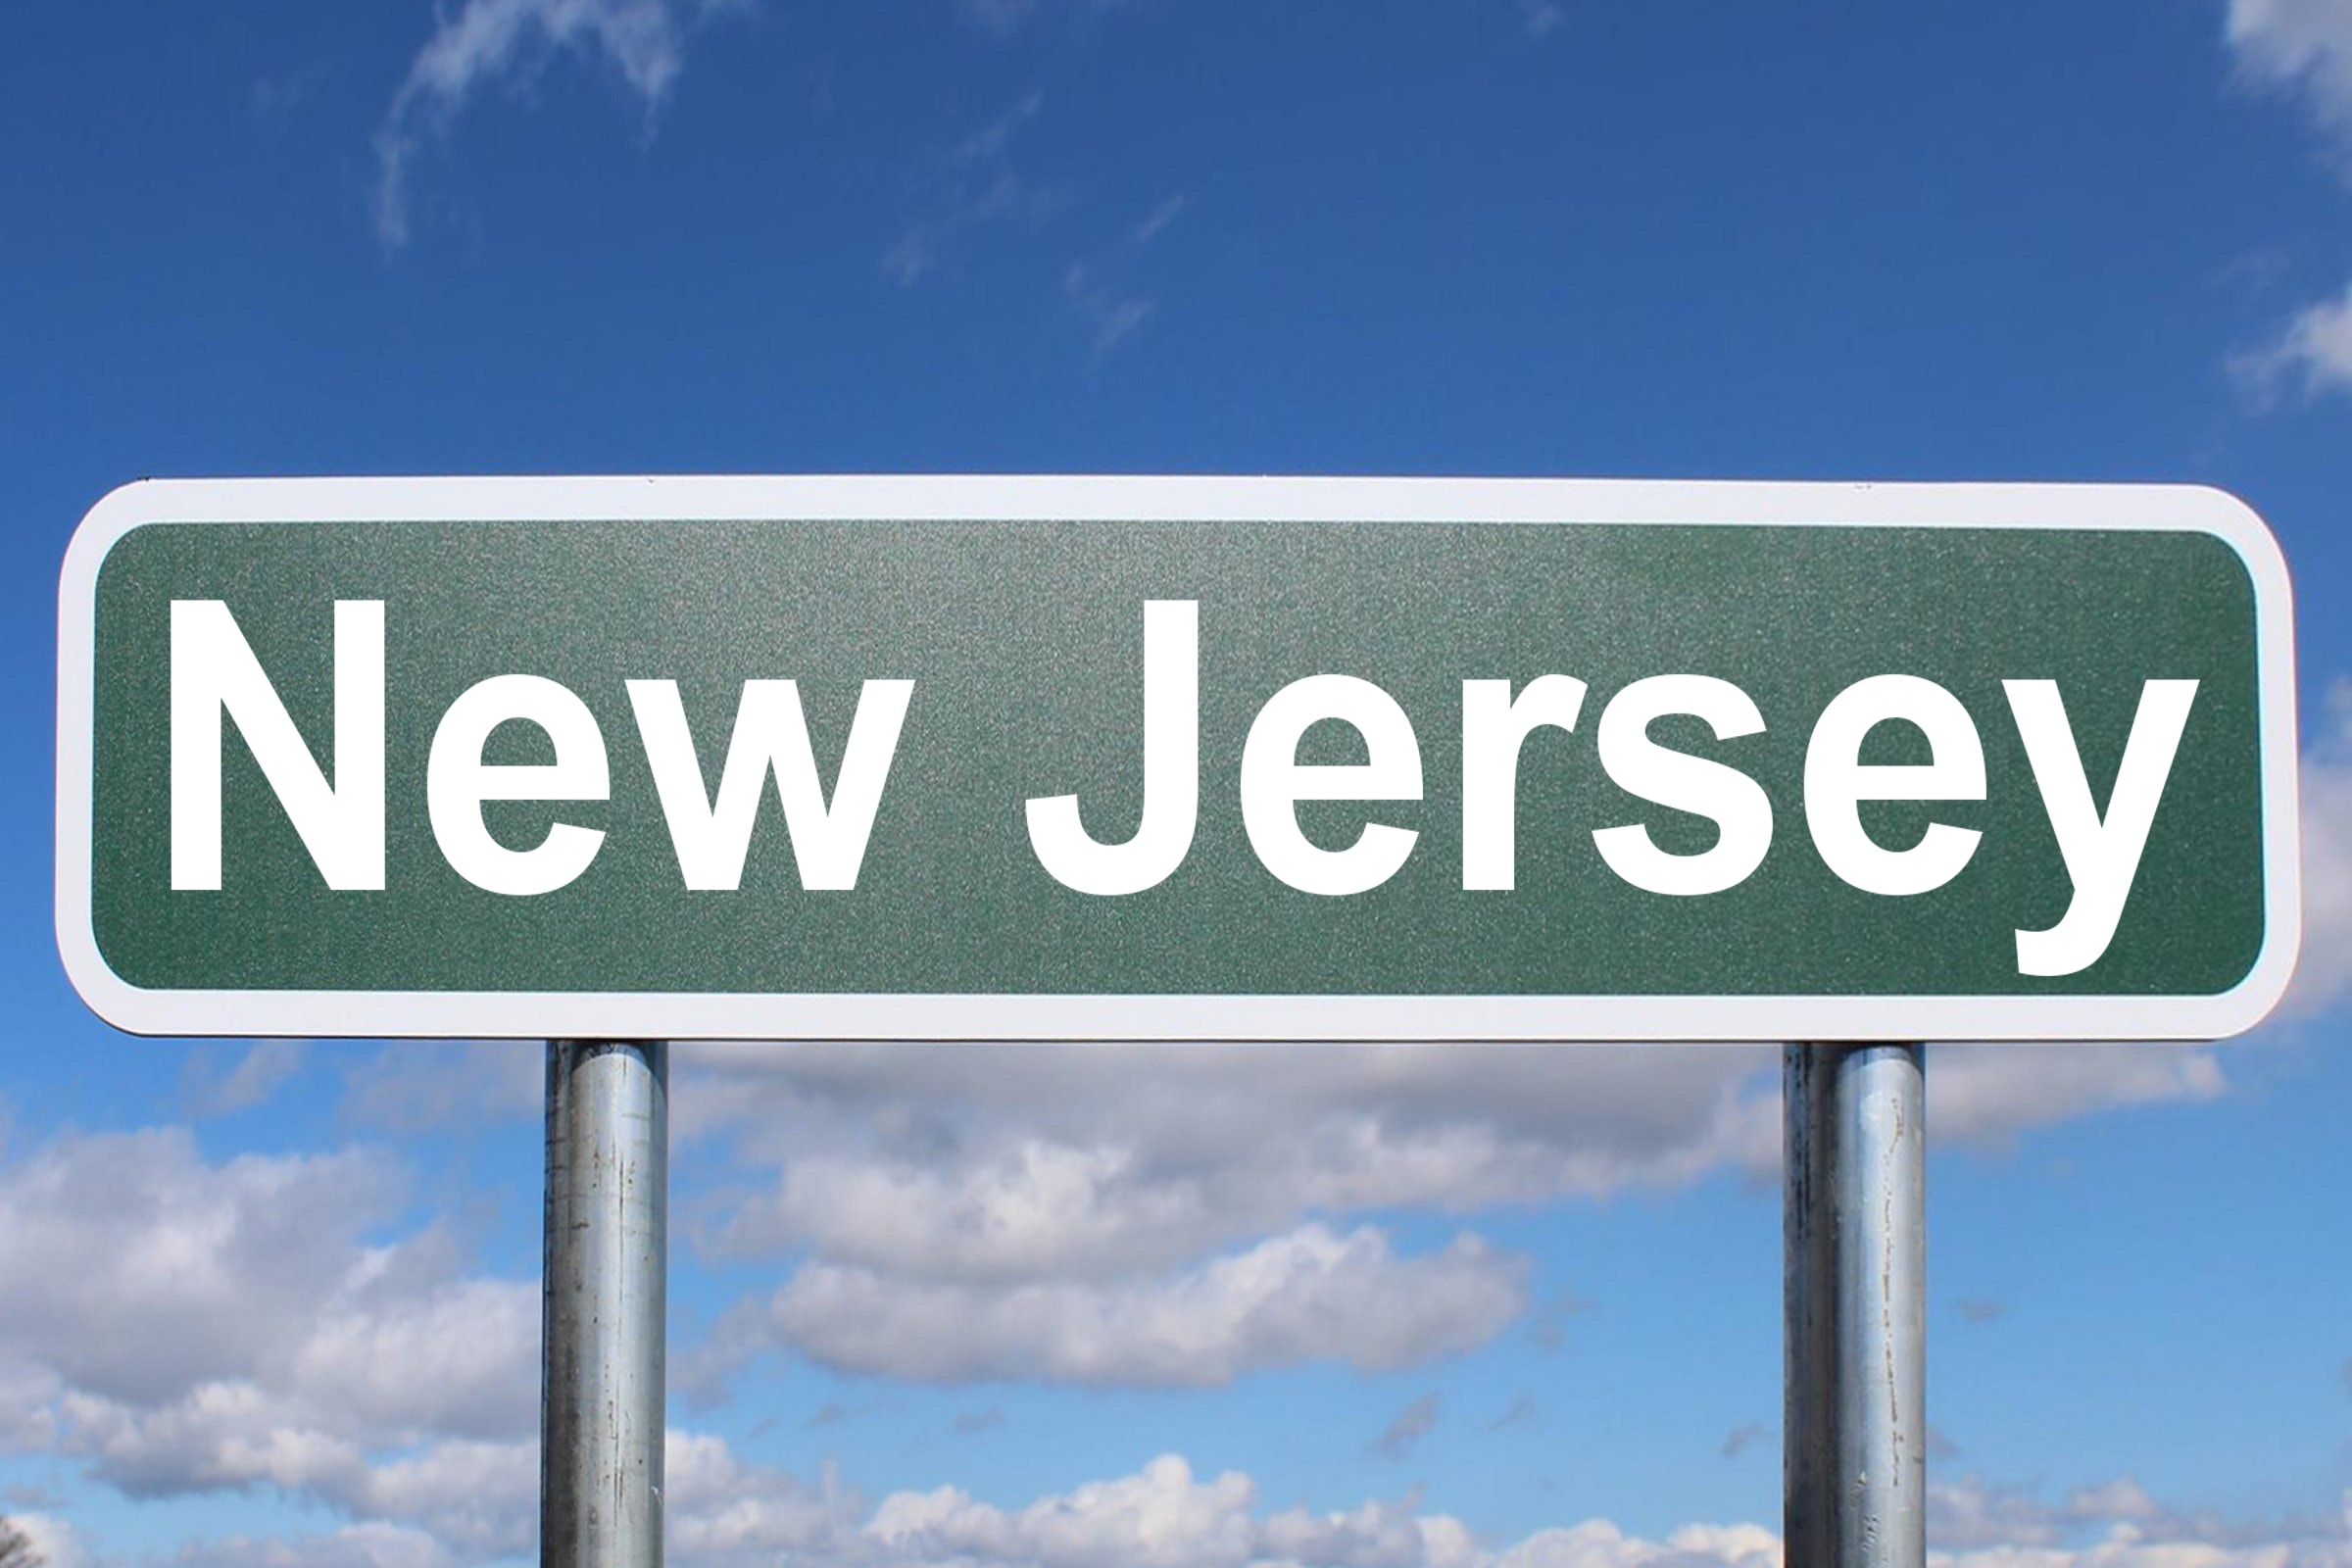 New Jersey Free of Charge Creative Commons Highway sign image